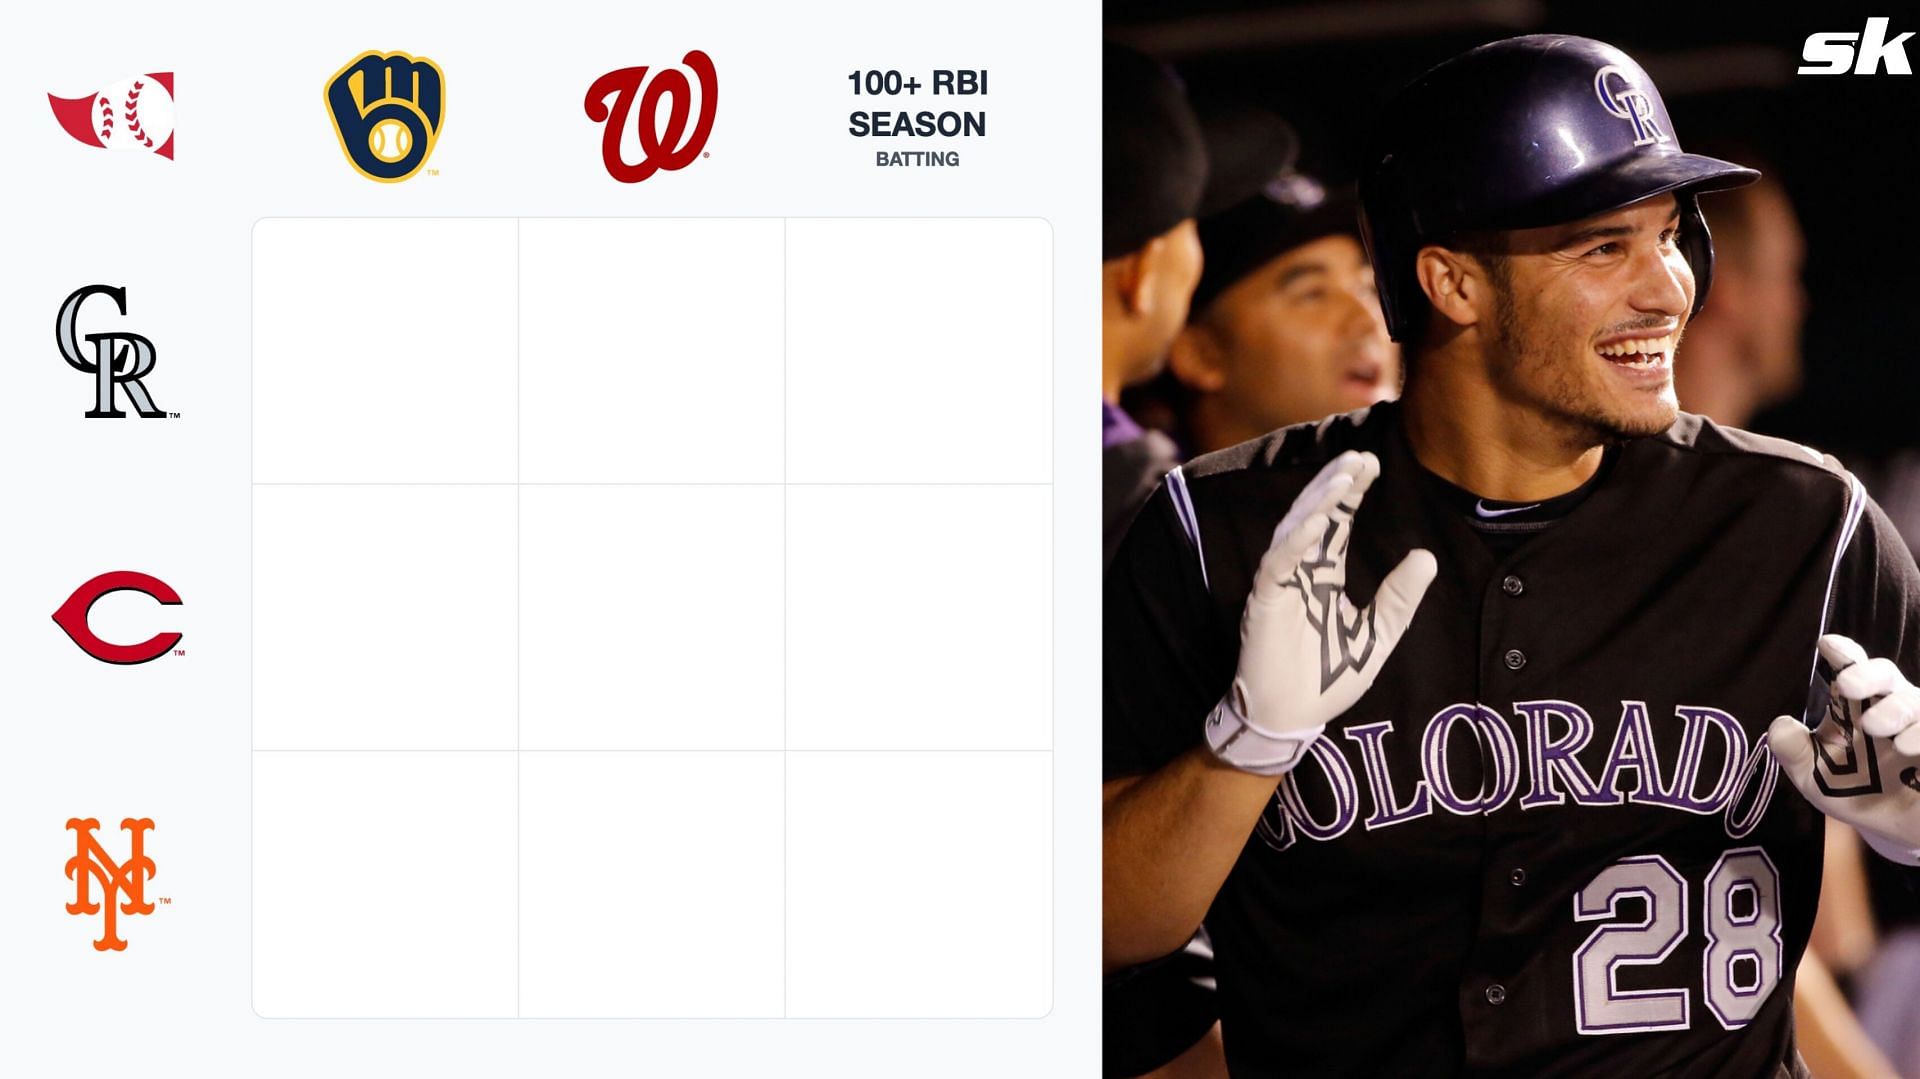 MLB Immaculate Grid Answers August 18 Rockies hitters to have recorded 100+ RBI in a season 